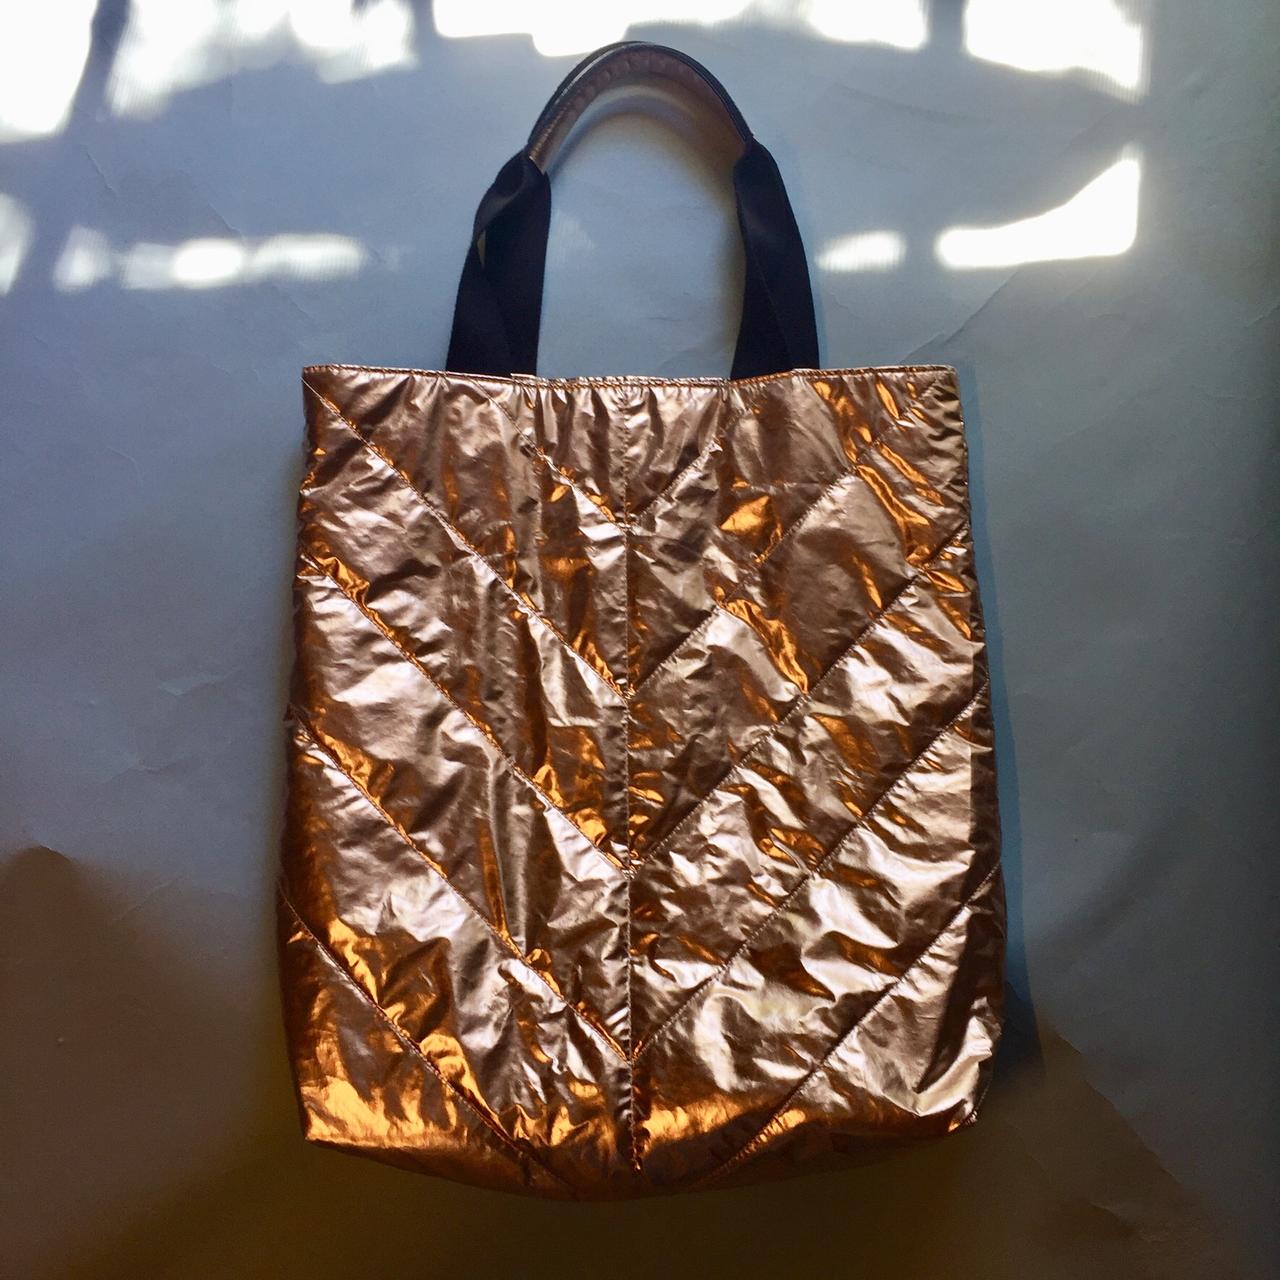 VICTORIA'S SECRET TOTE BAG - Puffy and quilted in - Depop